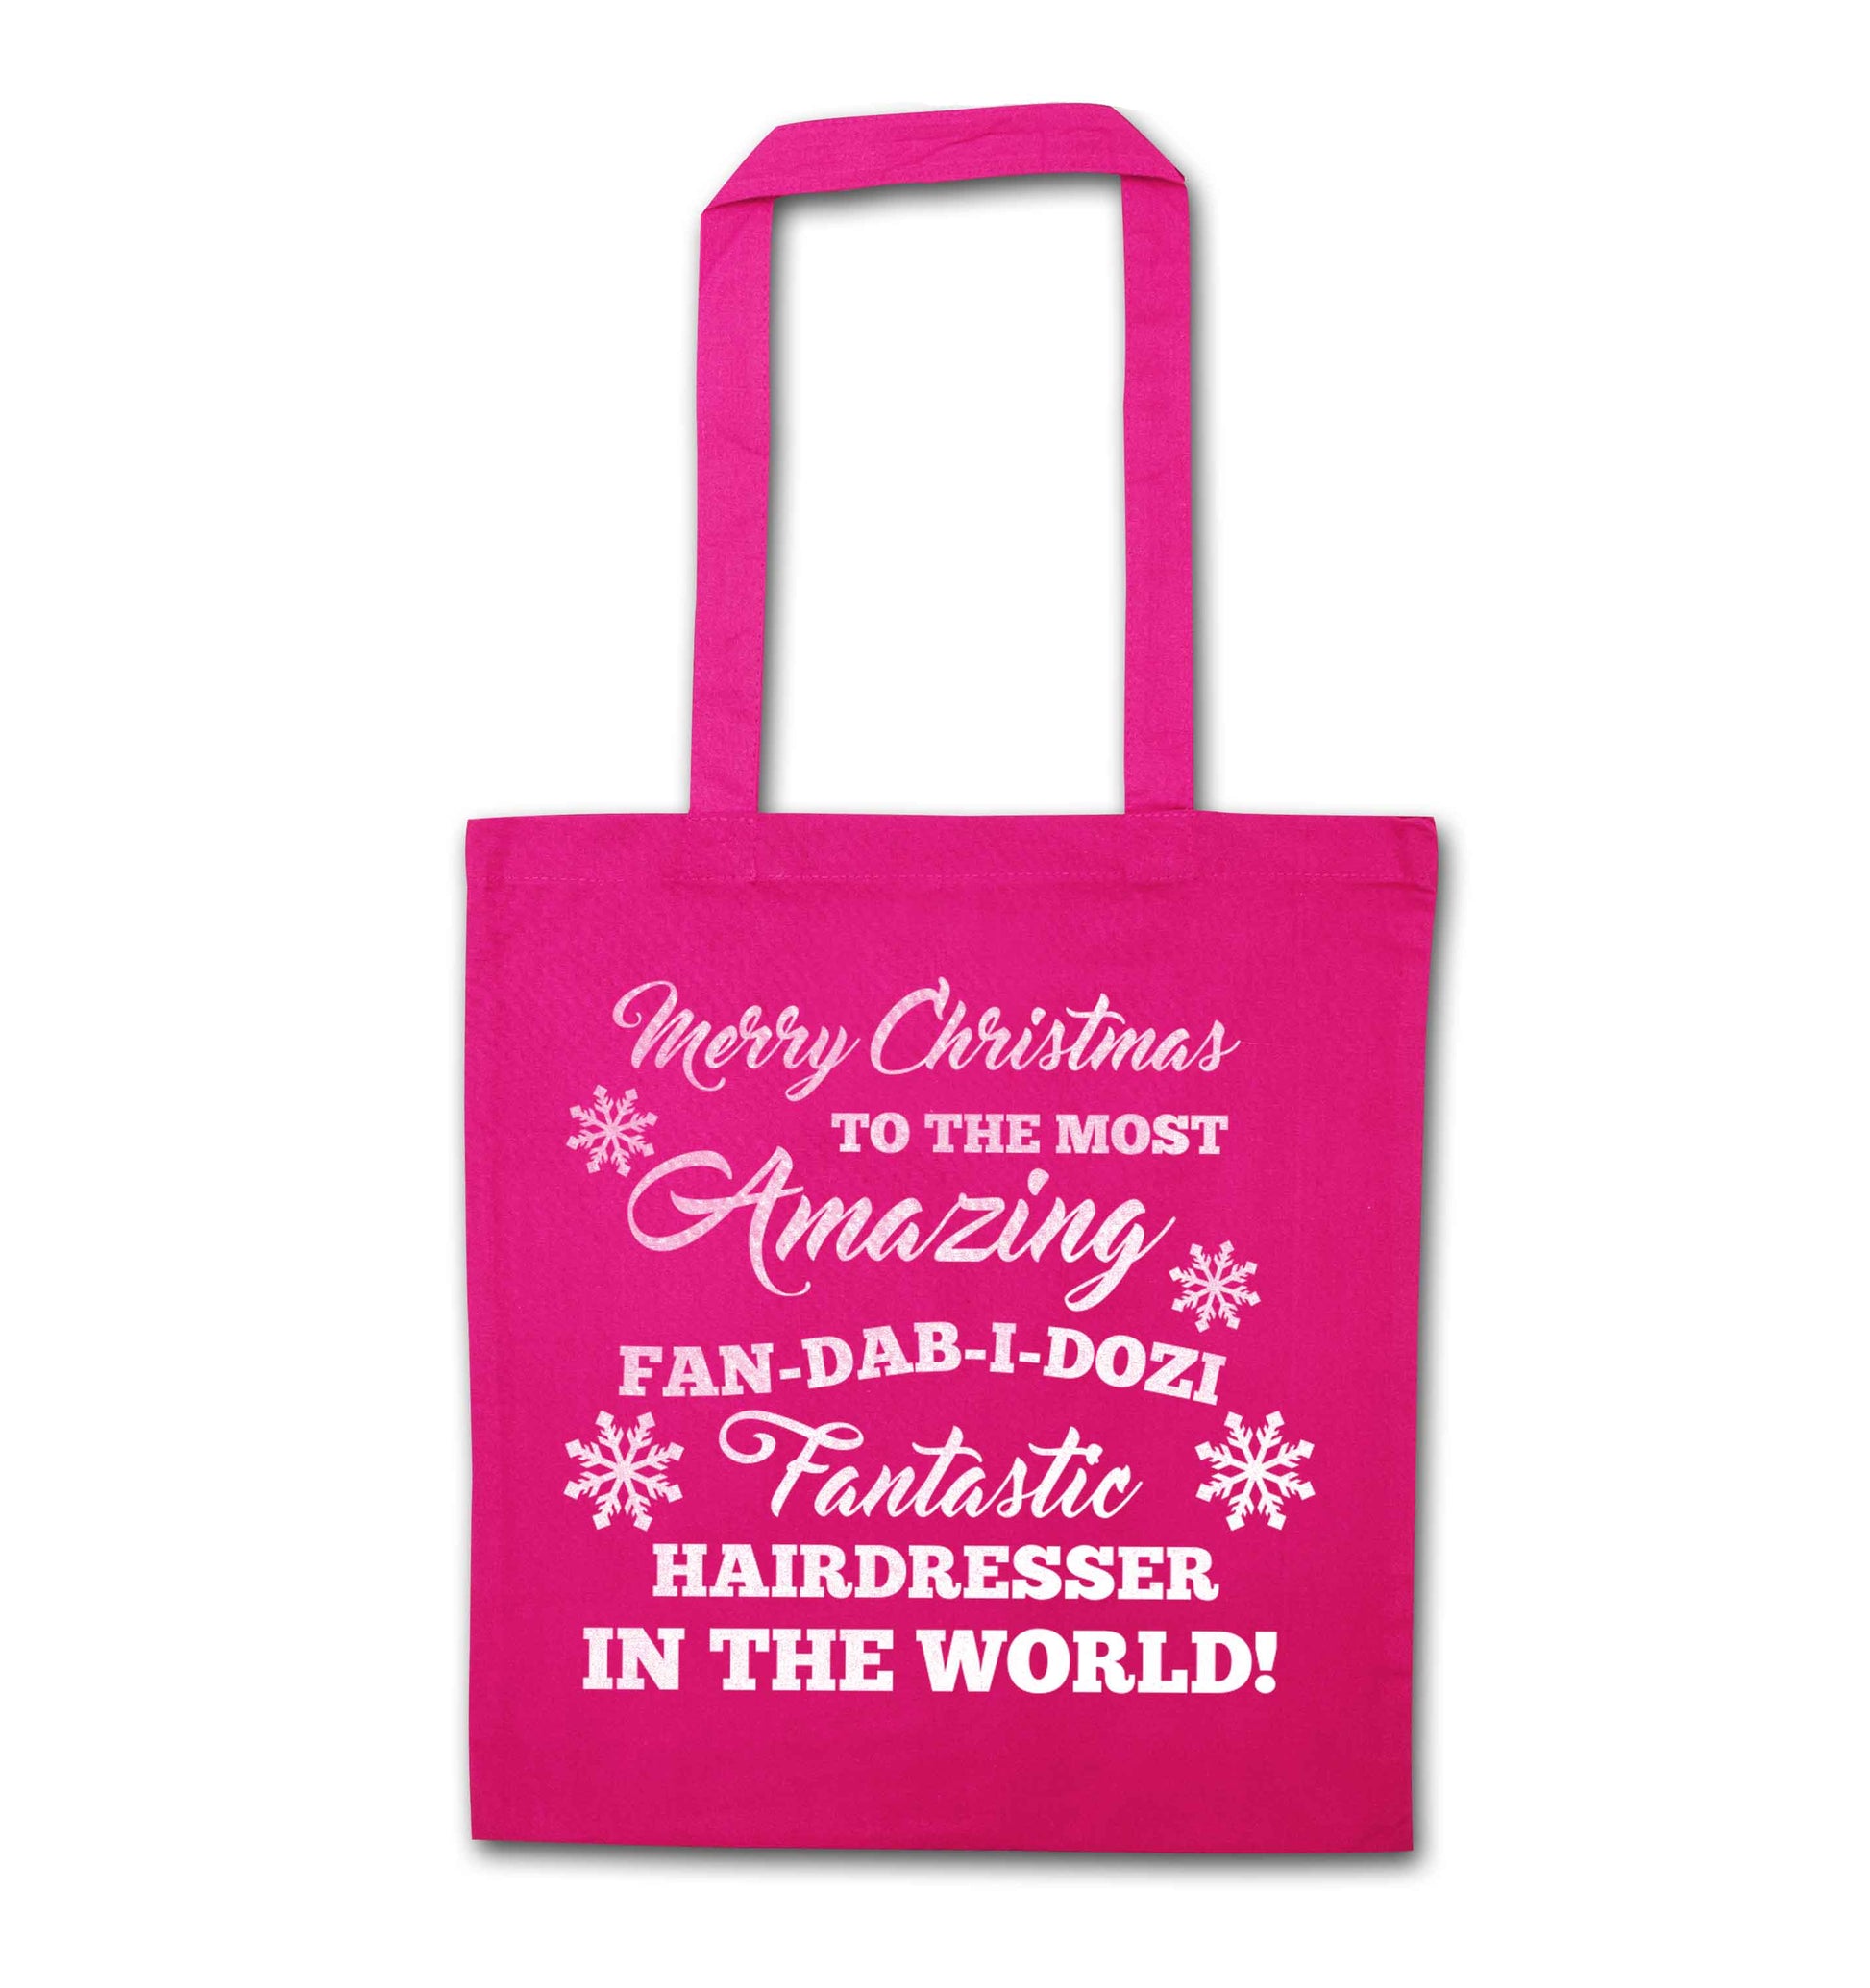 Merry Christmas to the most amazing dental assistant in the world! pink tote bag